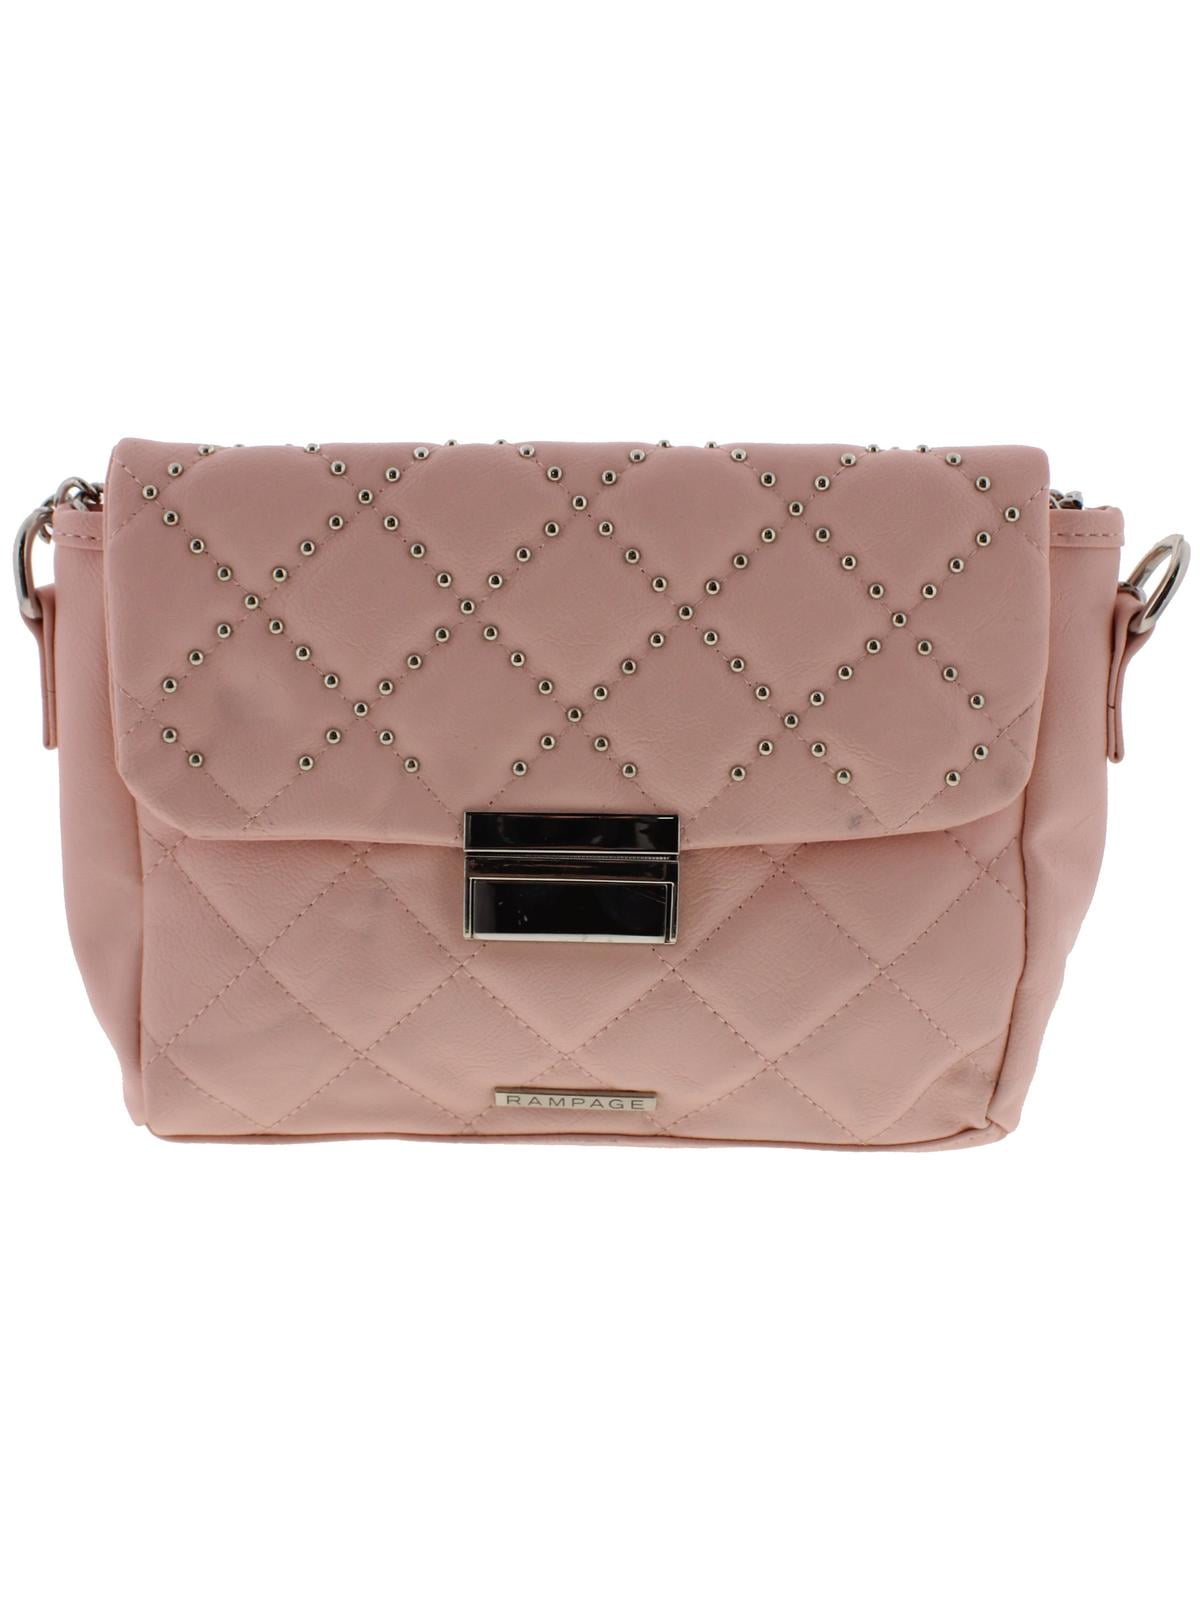 Rampage - Rampage Womens Faux Leather Quilted Crossbody Handbag ...